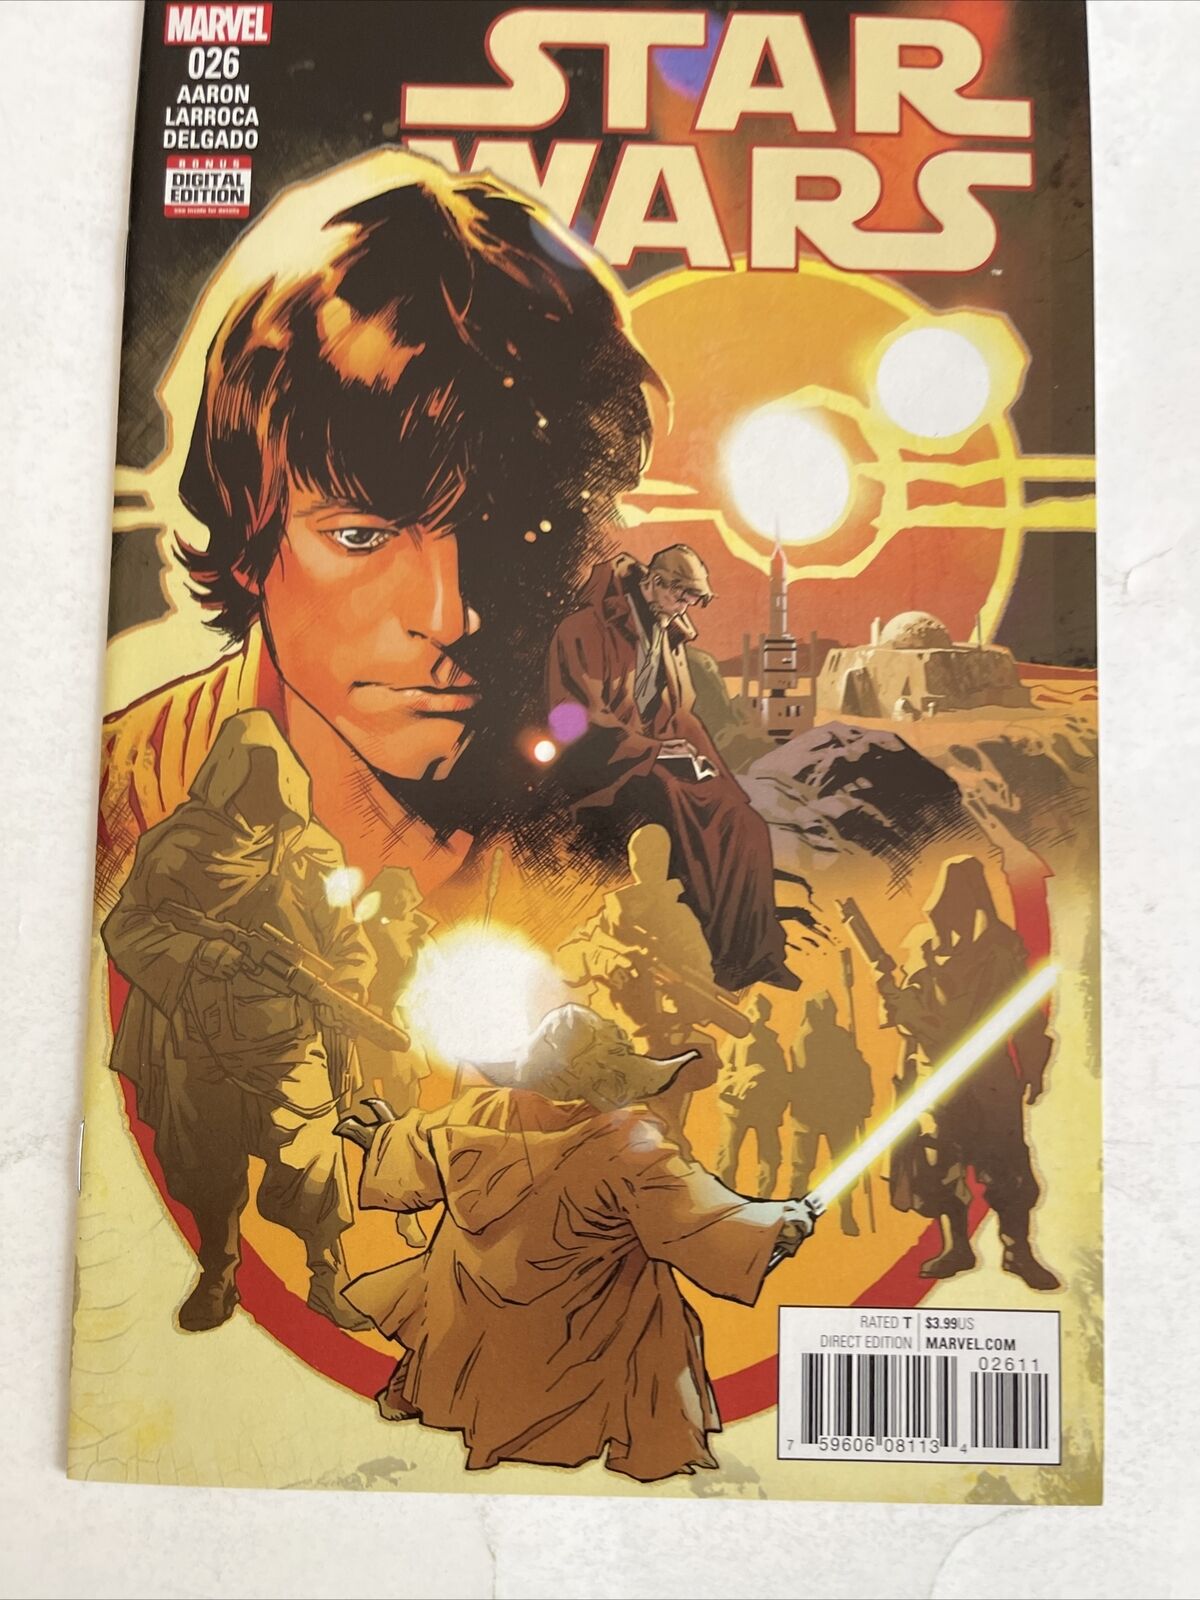 Star Wars Issue 26 Marvel Comic Book - Combine Shipping And Save